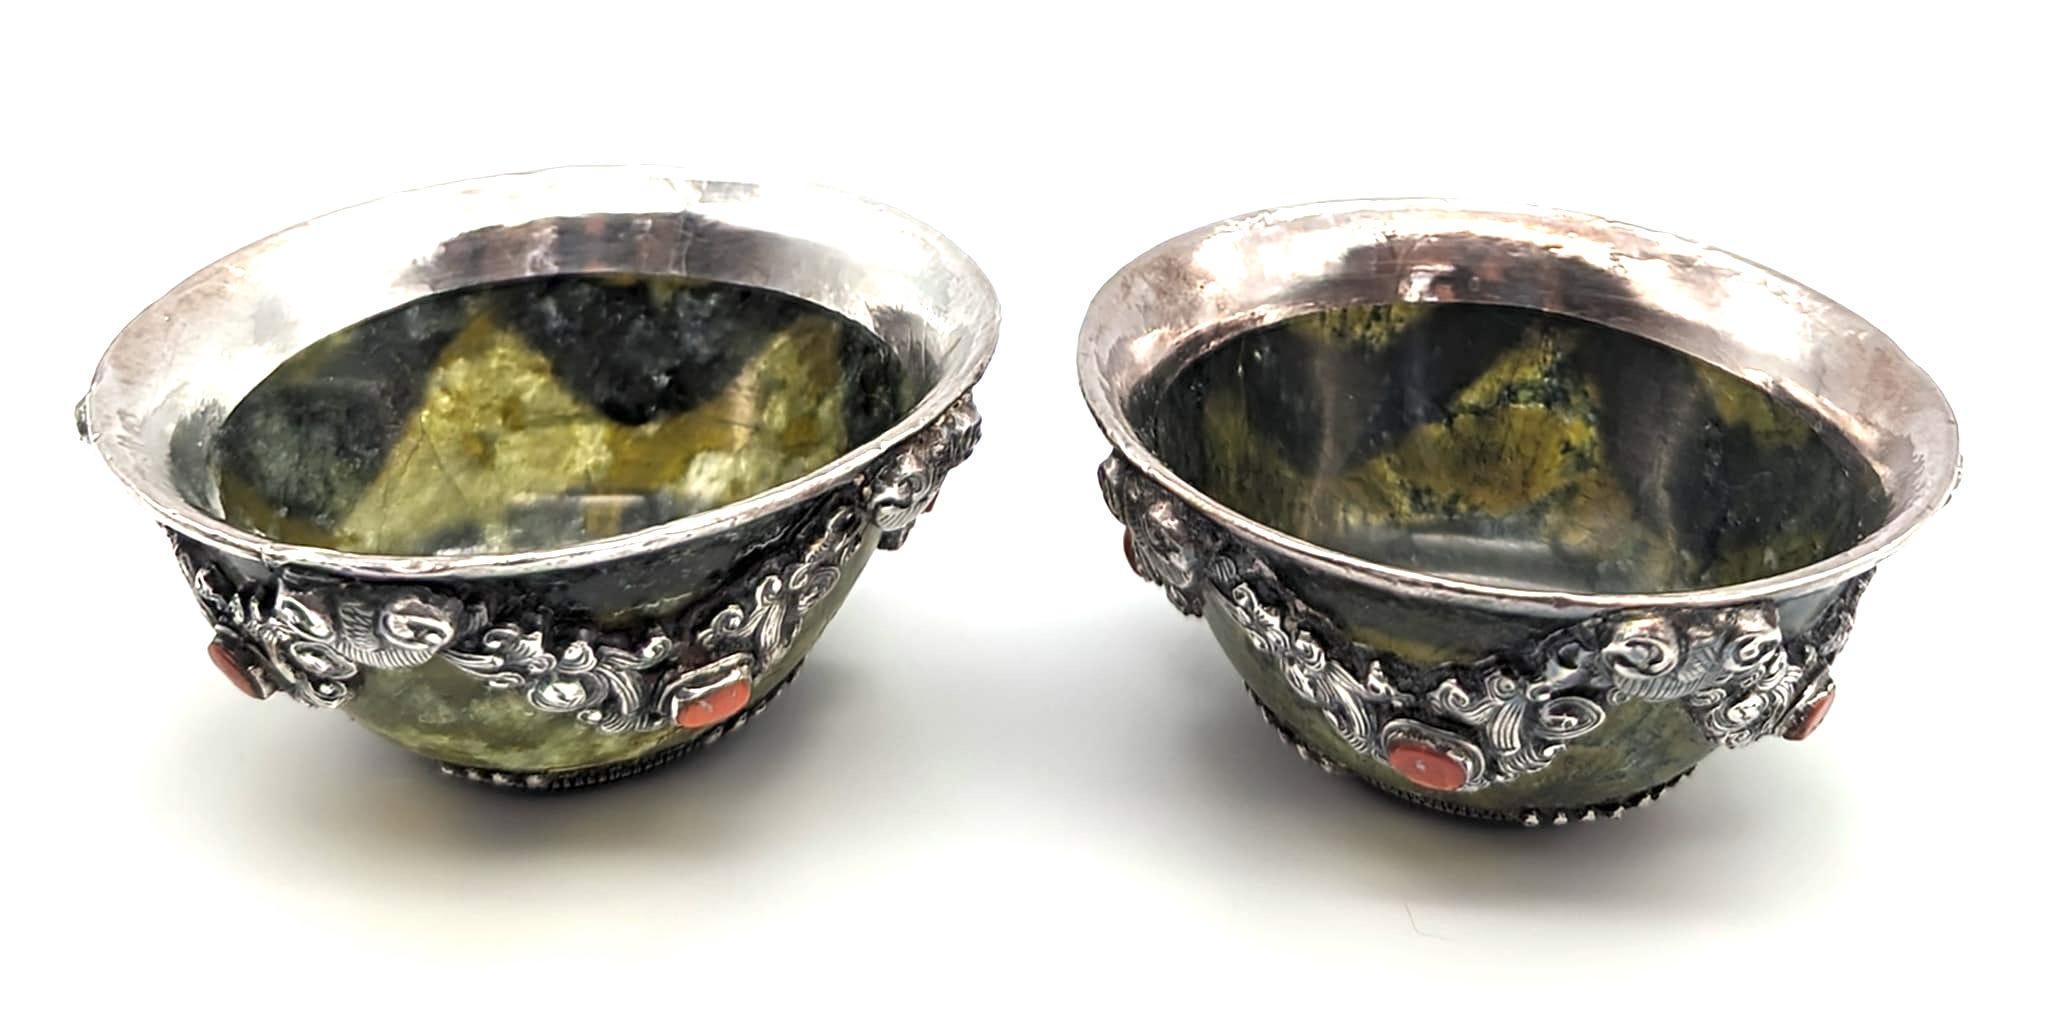 Offered is a pair of handcrafted sculpted and hammered jade Tibetan tea cups embellished with embossed sterling silver motifs and red coral cut stones inset. The jade is dark, yet semi-transparent and light passes through. Can be used as salt bowls,